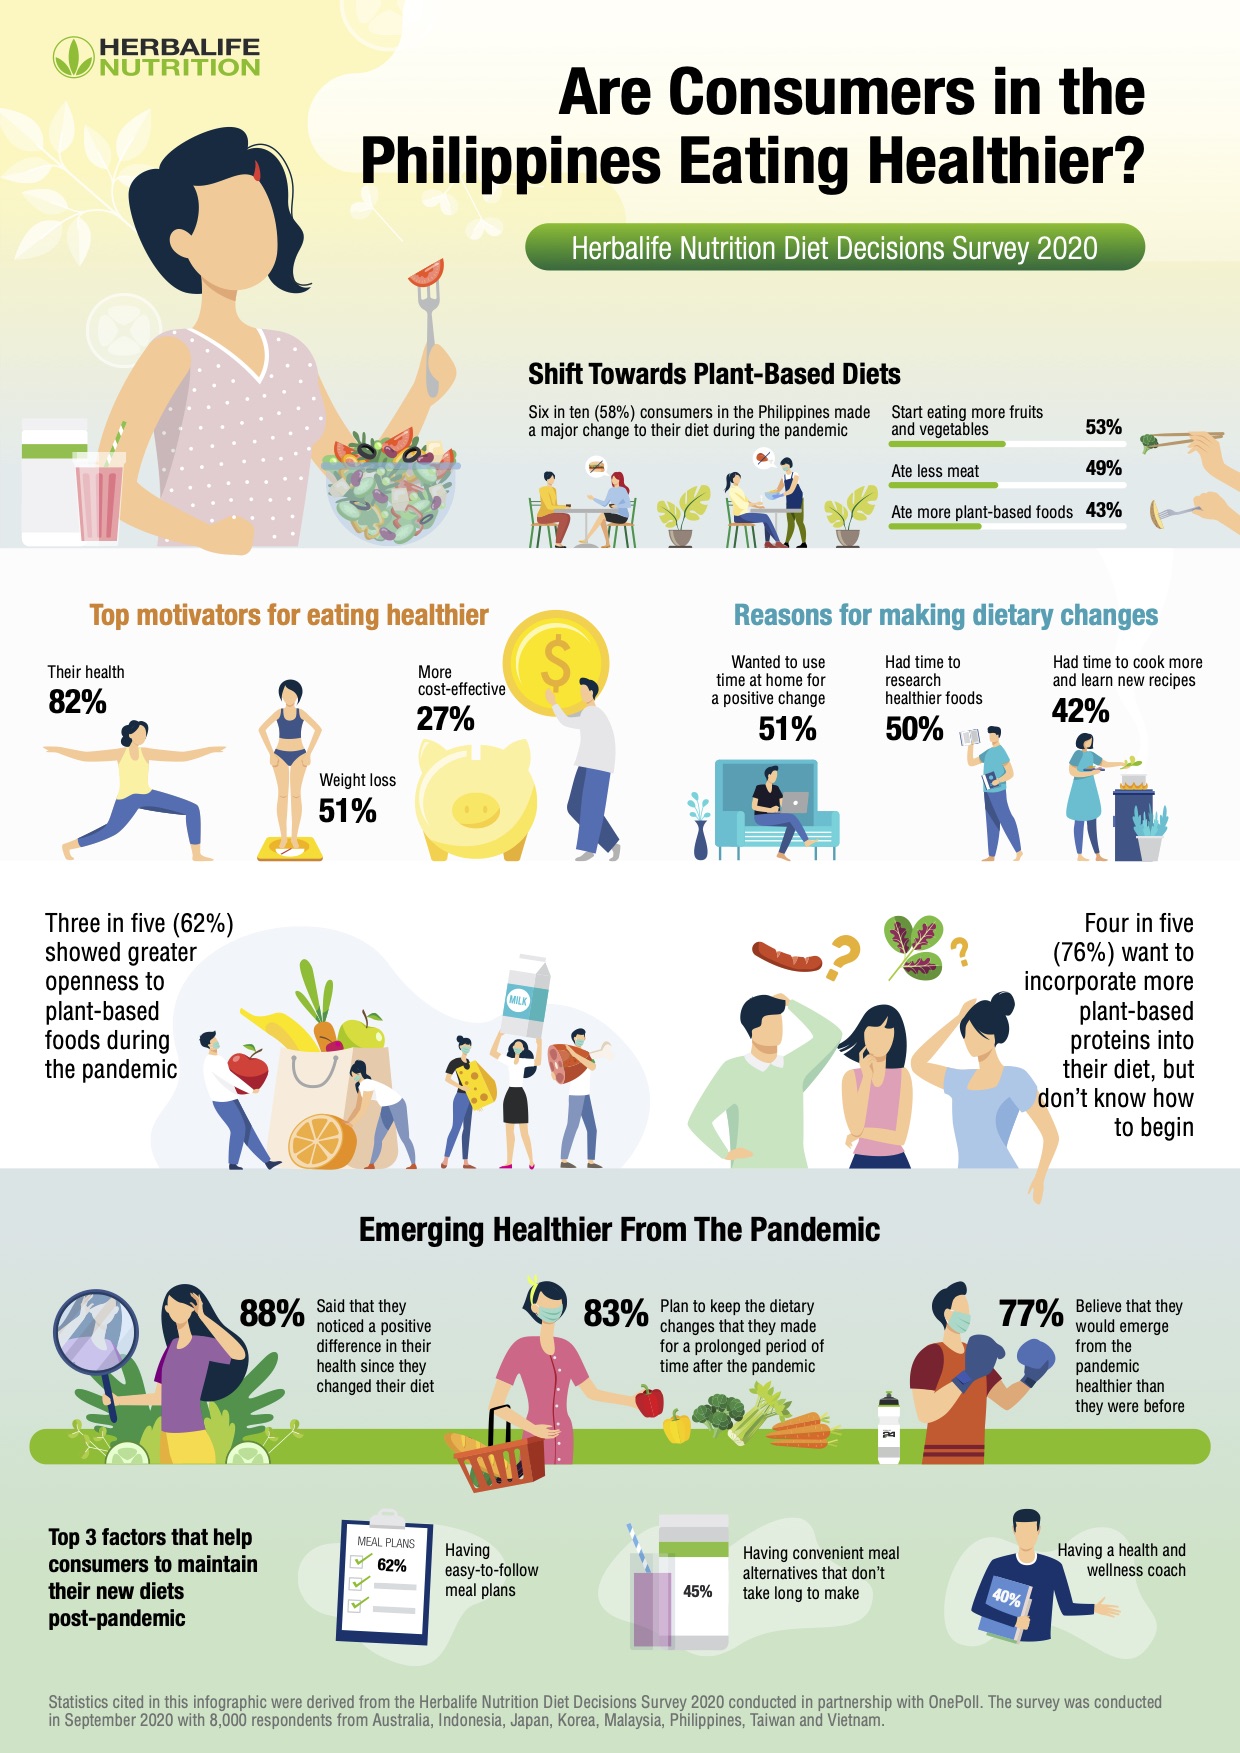 More Filipino consumers are eating healthier in the new normal,  open to plant-based/meatless food – Herbalife Nutrition survey